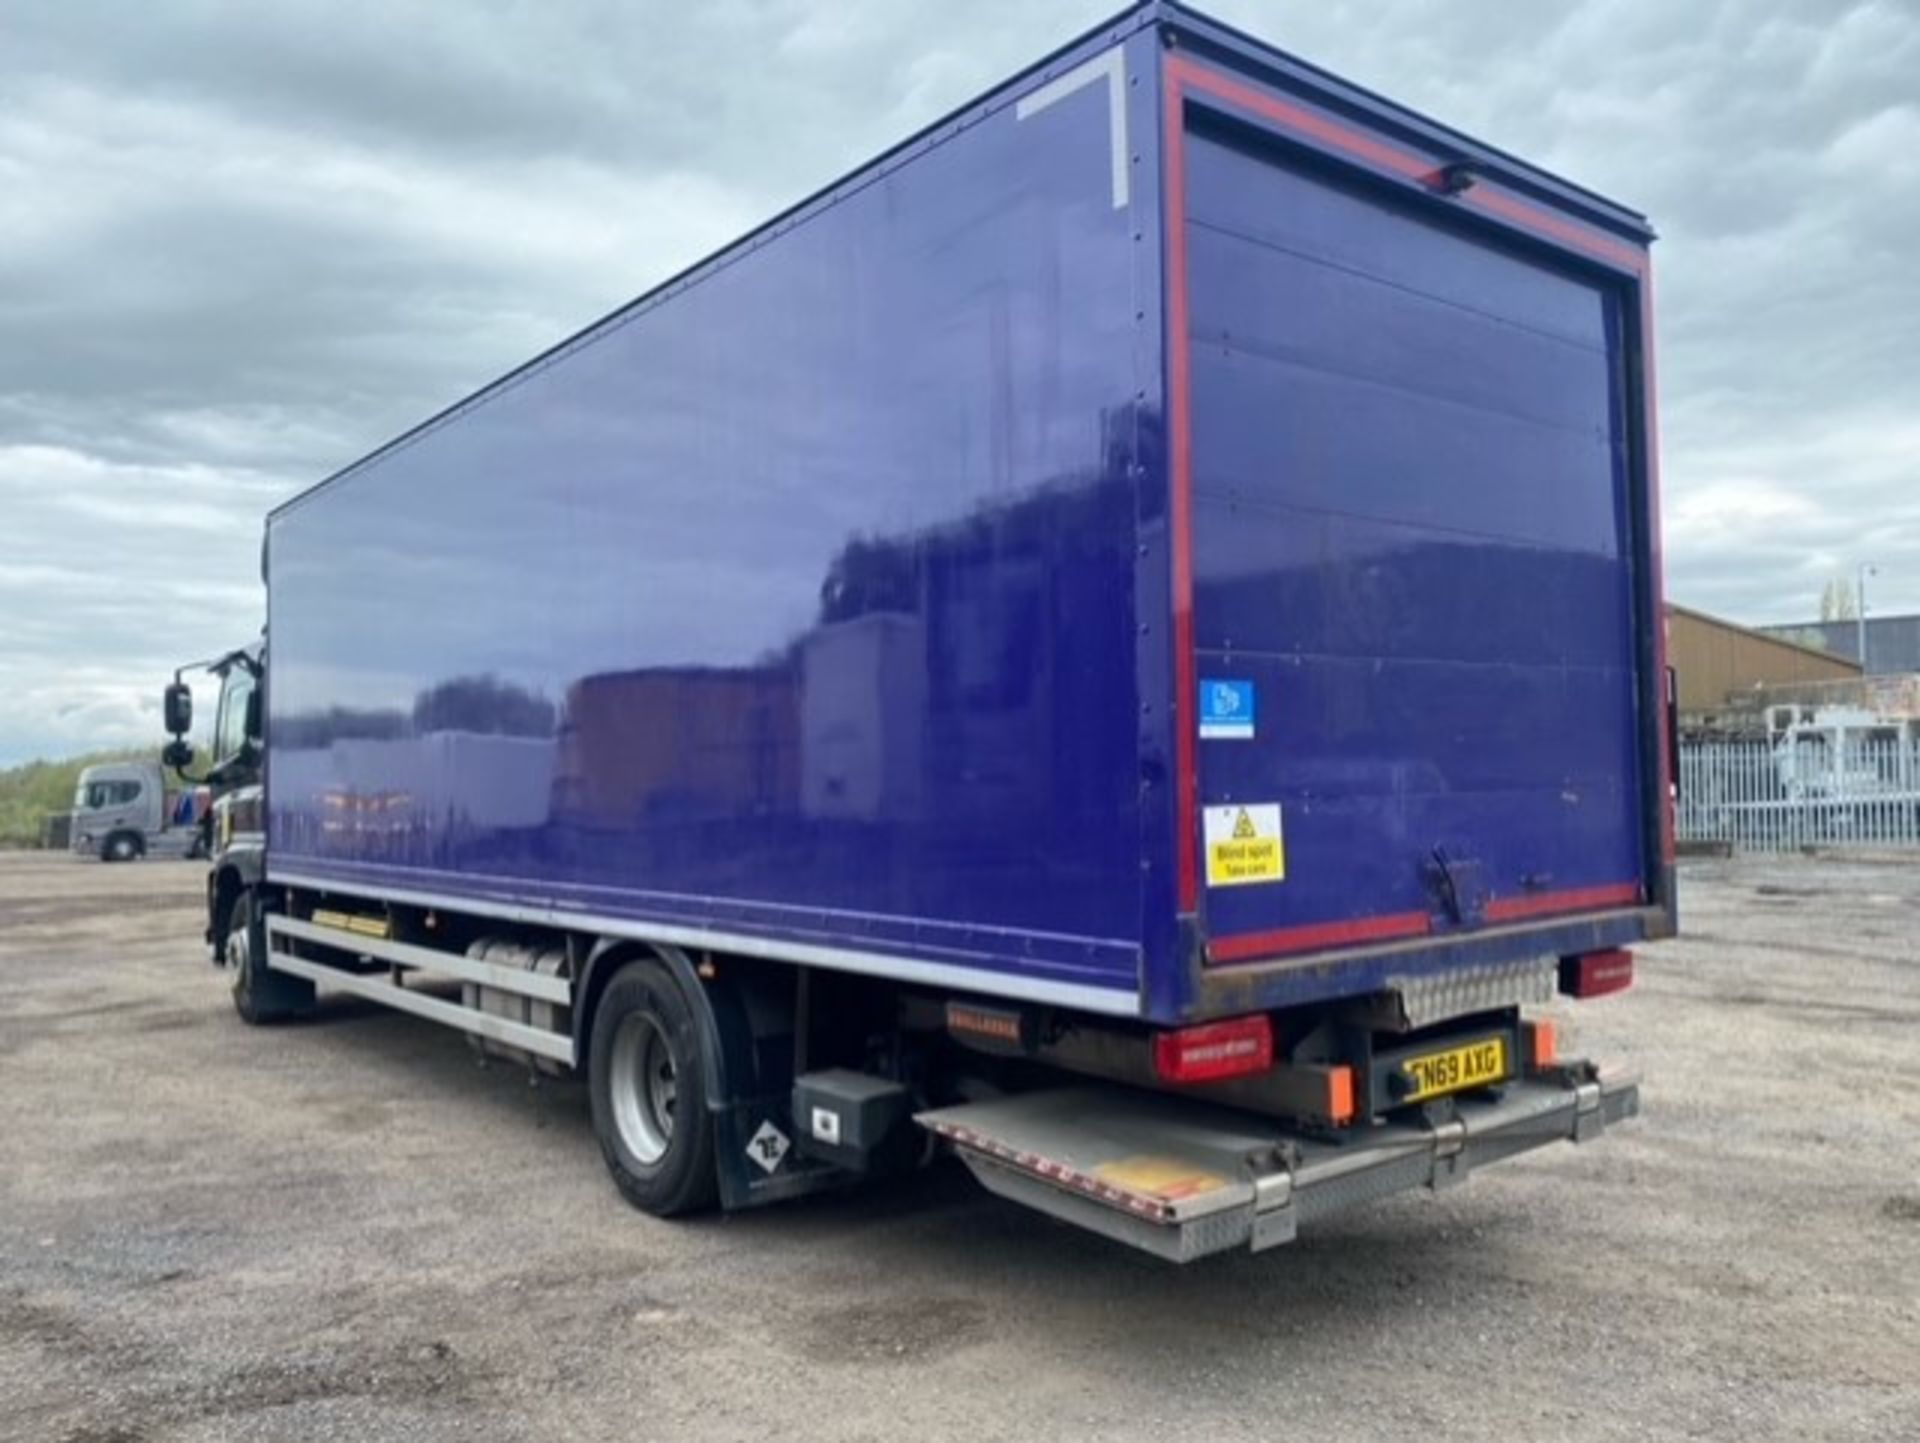 2019, DAF CF 260 - FN69 AXG (18 Ton Rigid Truck with Tail Lift) - Image 16 of 16